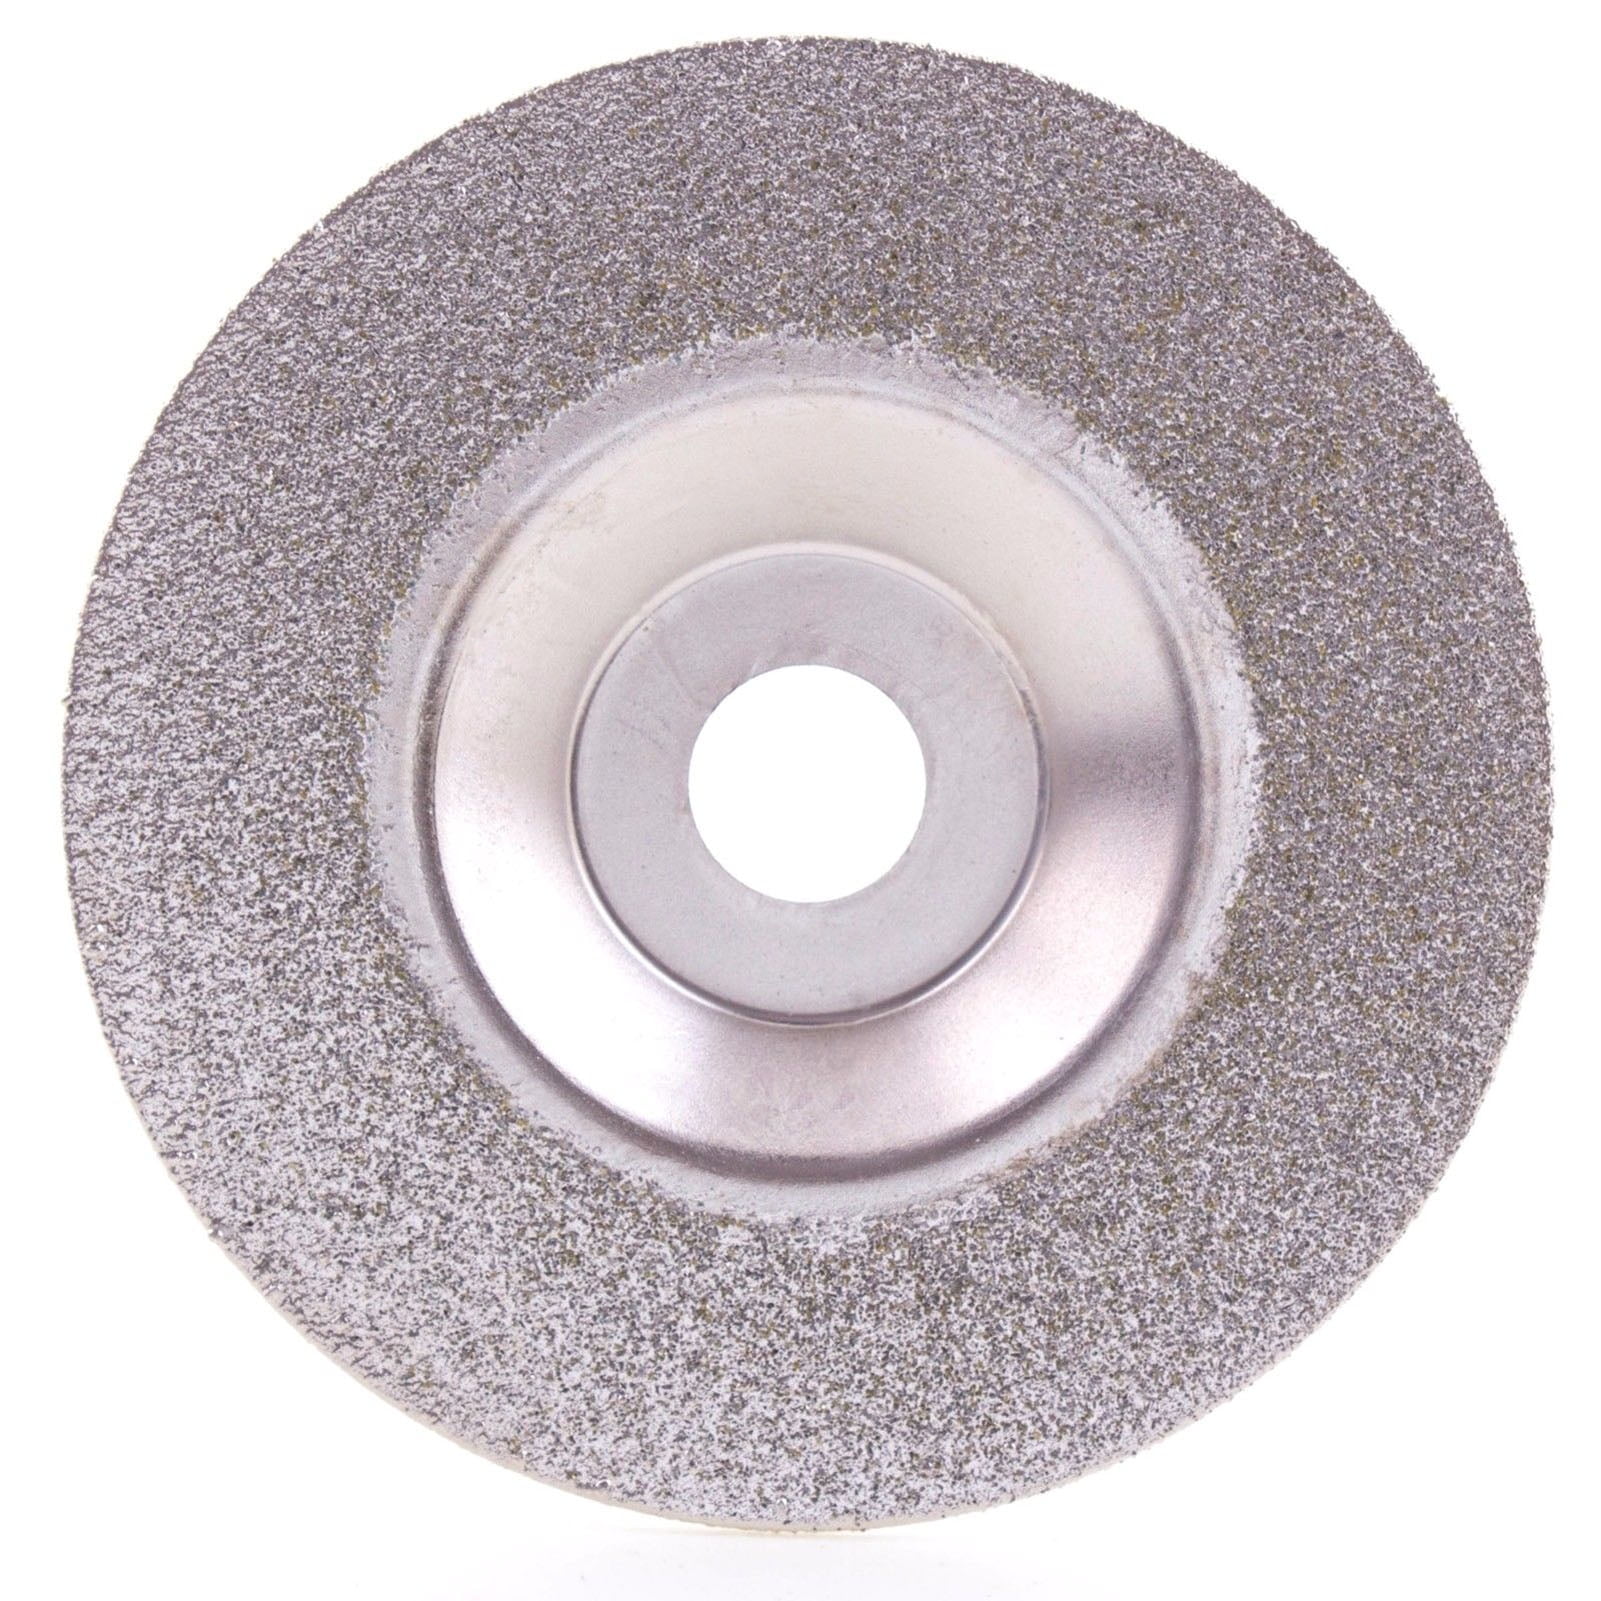 4 Inch Diamond Coated Grinding Disc Wheel 60 Grit Angle Grinder Accessories